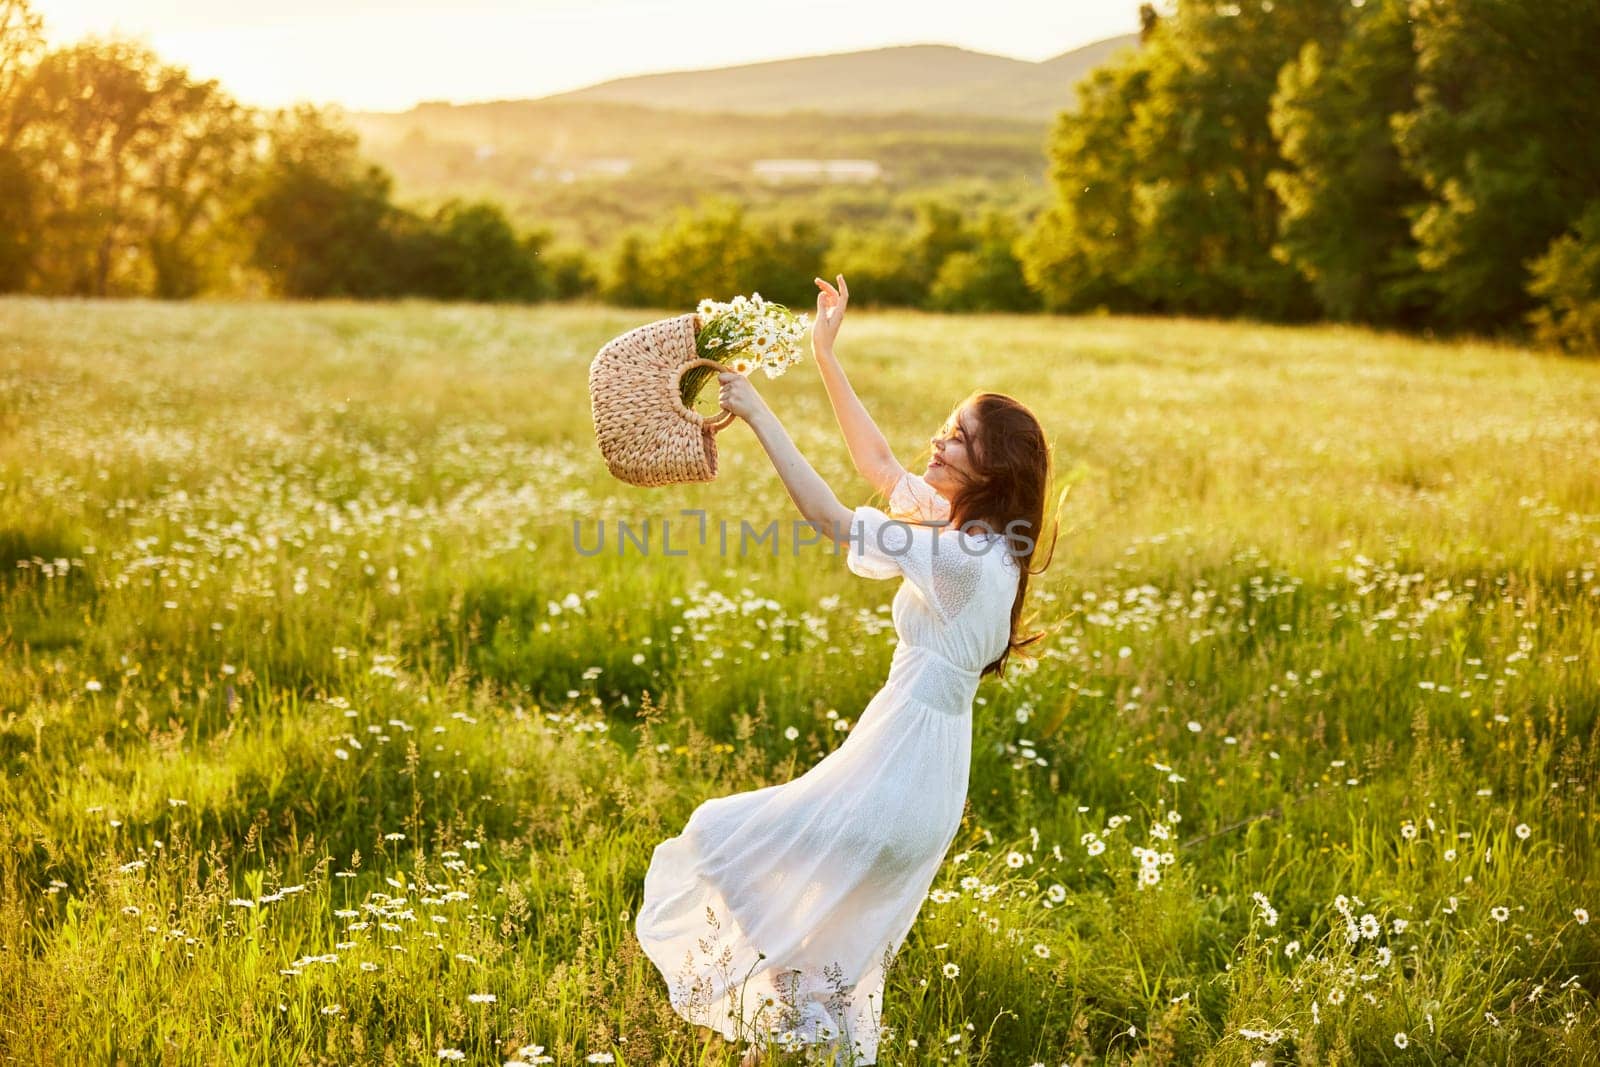 happy woman in a long light dress fool in the field with a wicker basket in her hands by Vichizh